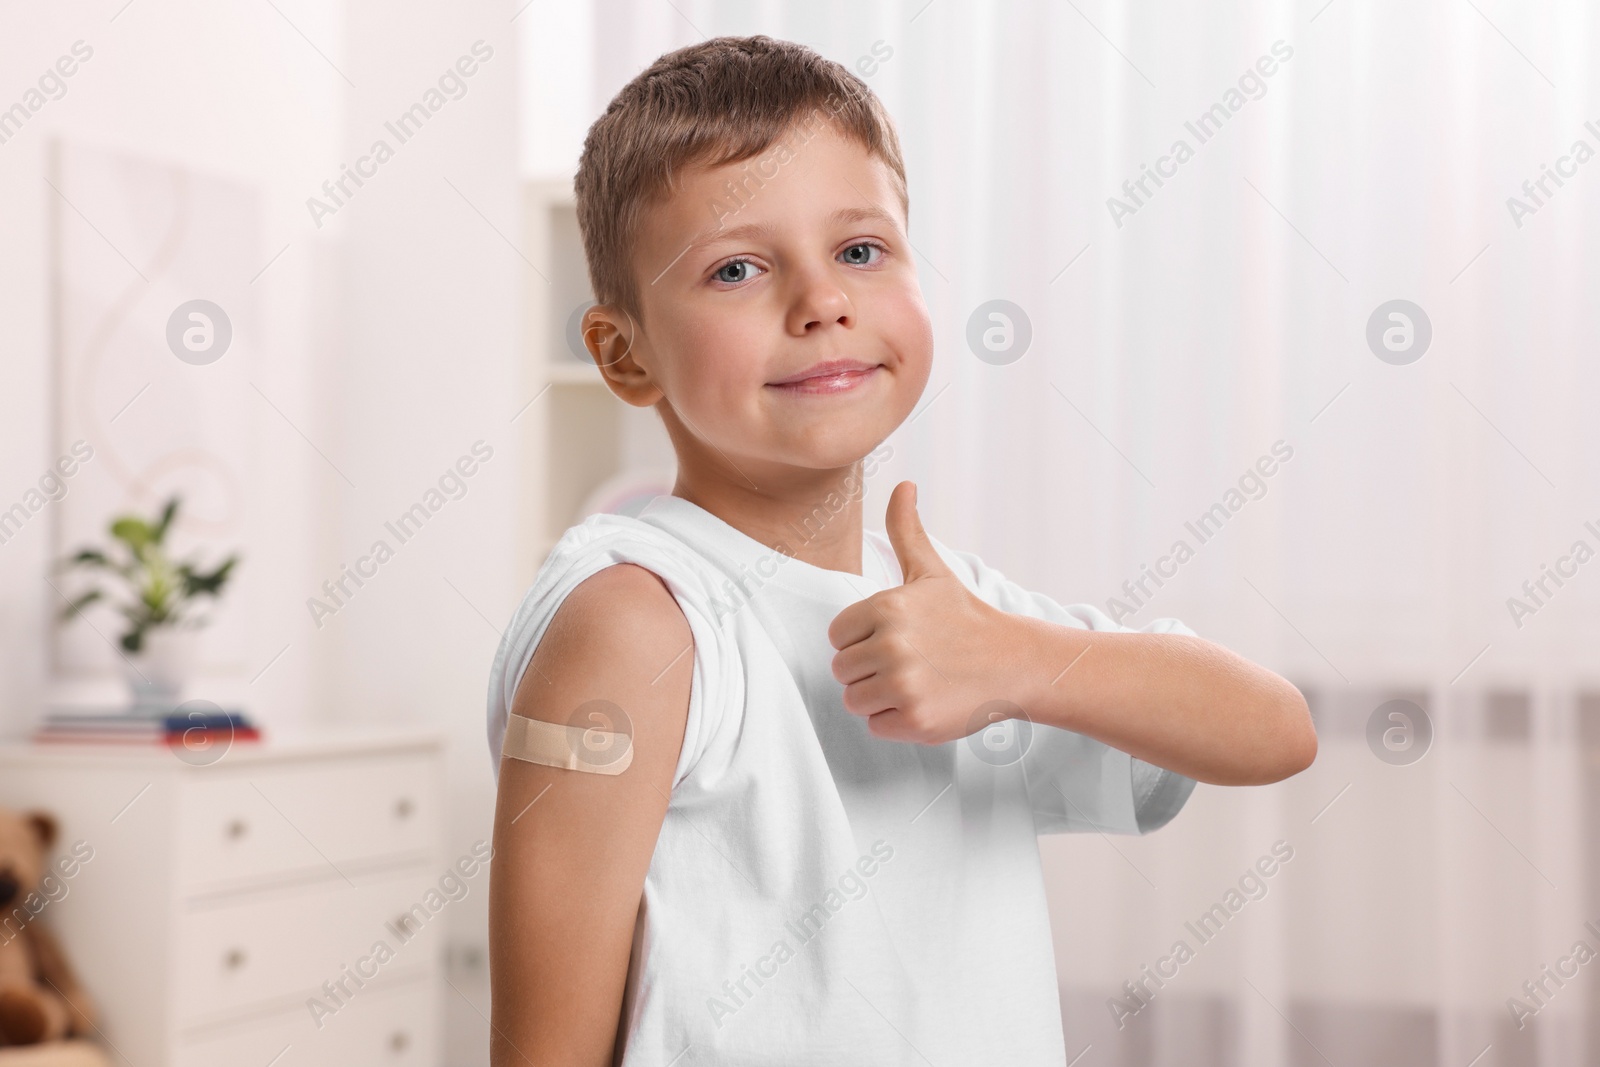 Photo of Boy with sticking plaster on arm after vaccination showing thumbs up indoors